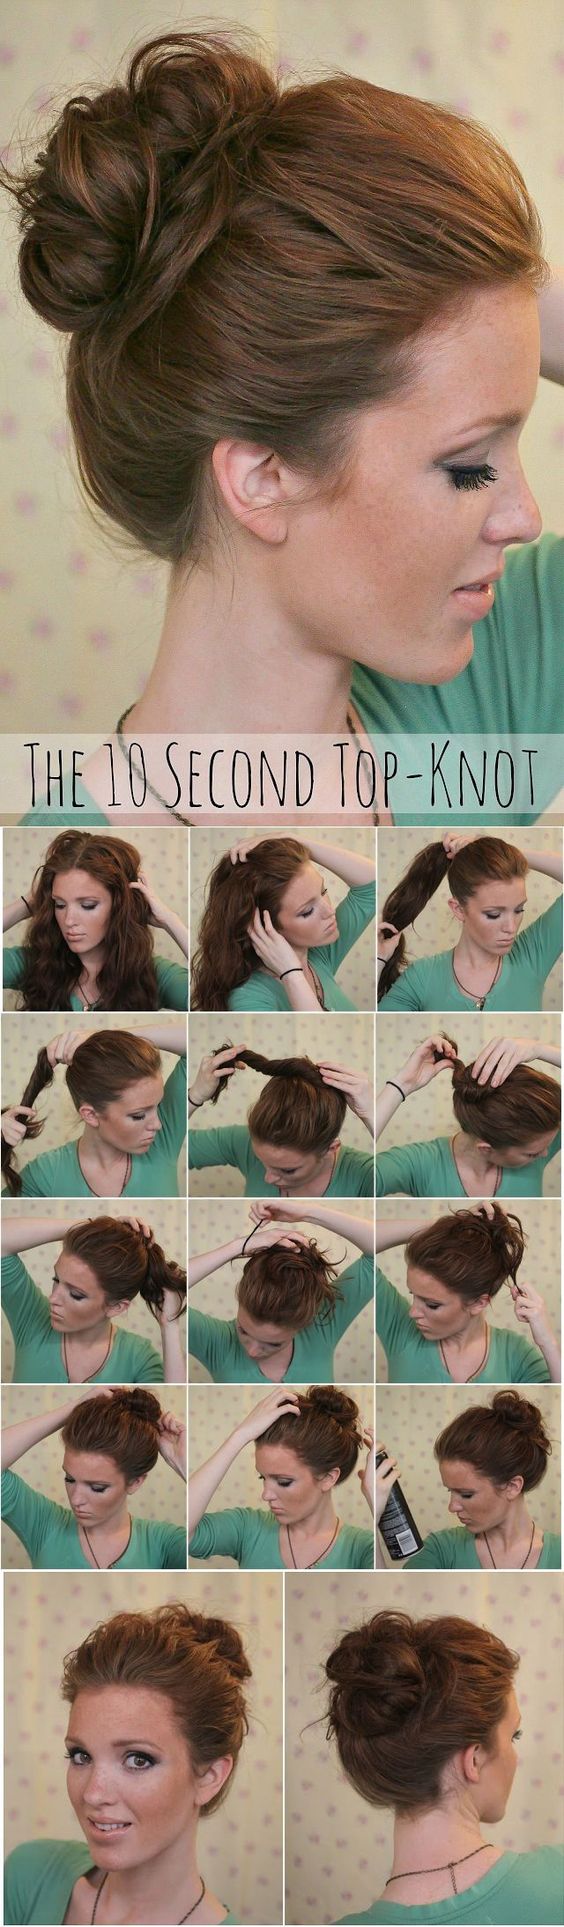 Super Easy Hairstyles With Tutorial - the messy top bun